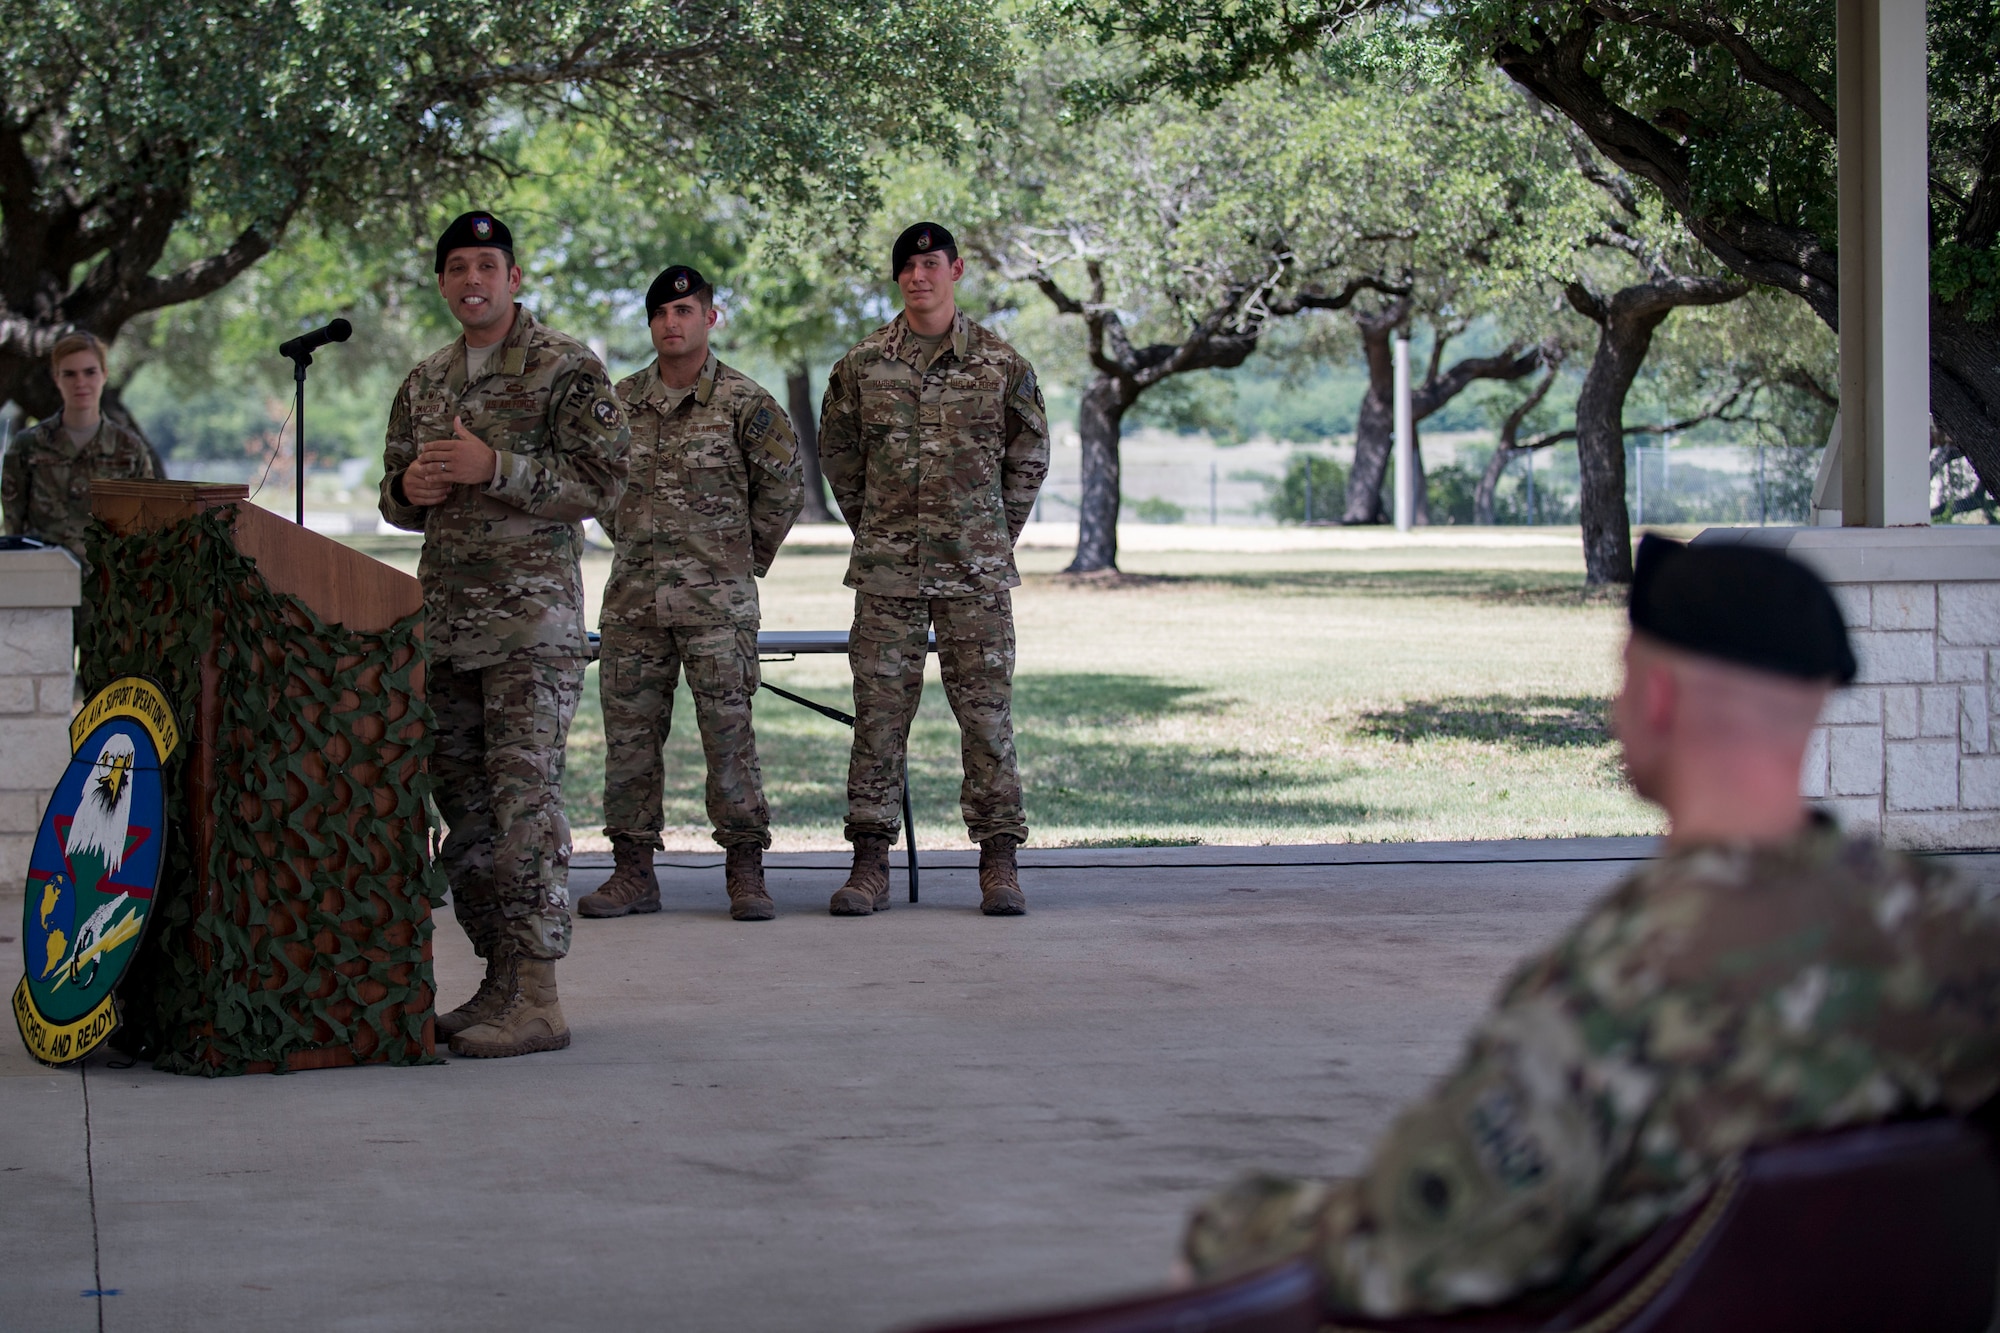 Lt. Col. Frank Biancardi, outgoing 11th Air Support Operations Squadron (ASOS) commander, gives remarks during a squadron inactivation ceremony, June 21, 2018, at Fort Hood, Texas. As a part of the 93d Air Ground Operations Wing from Moody Air Force Base, Ga., the 11th ASOS ‘Steel Eagles’ mission will remain unchanged as they continue to support Ft. Hood and absorb into the 9th ASOS. The enhanced 9th ASOS will continue to provide tactical air support to align with any U.S. Army unit that needs air support for their scheme of maneuver. (U.S. Air Force photo by Senior Airman Daniel Snider)